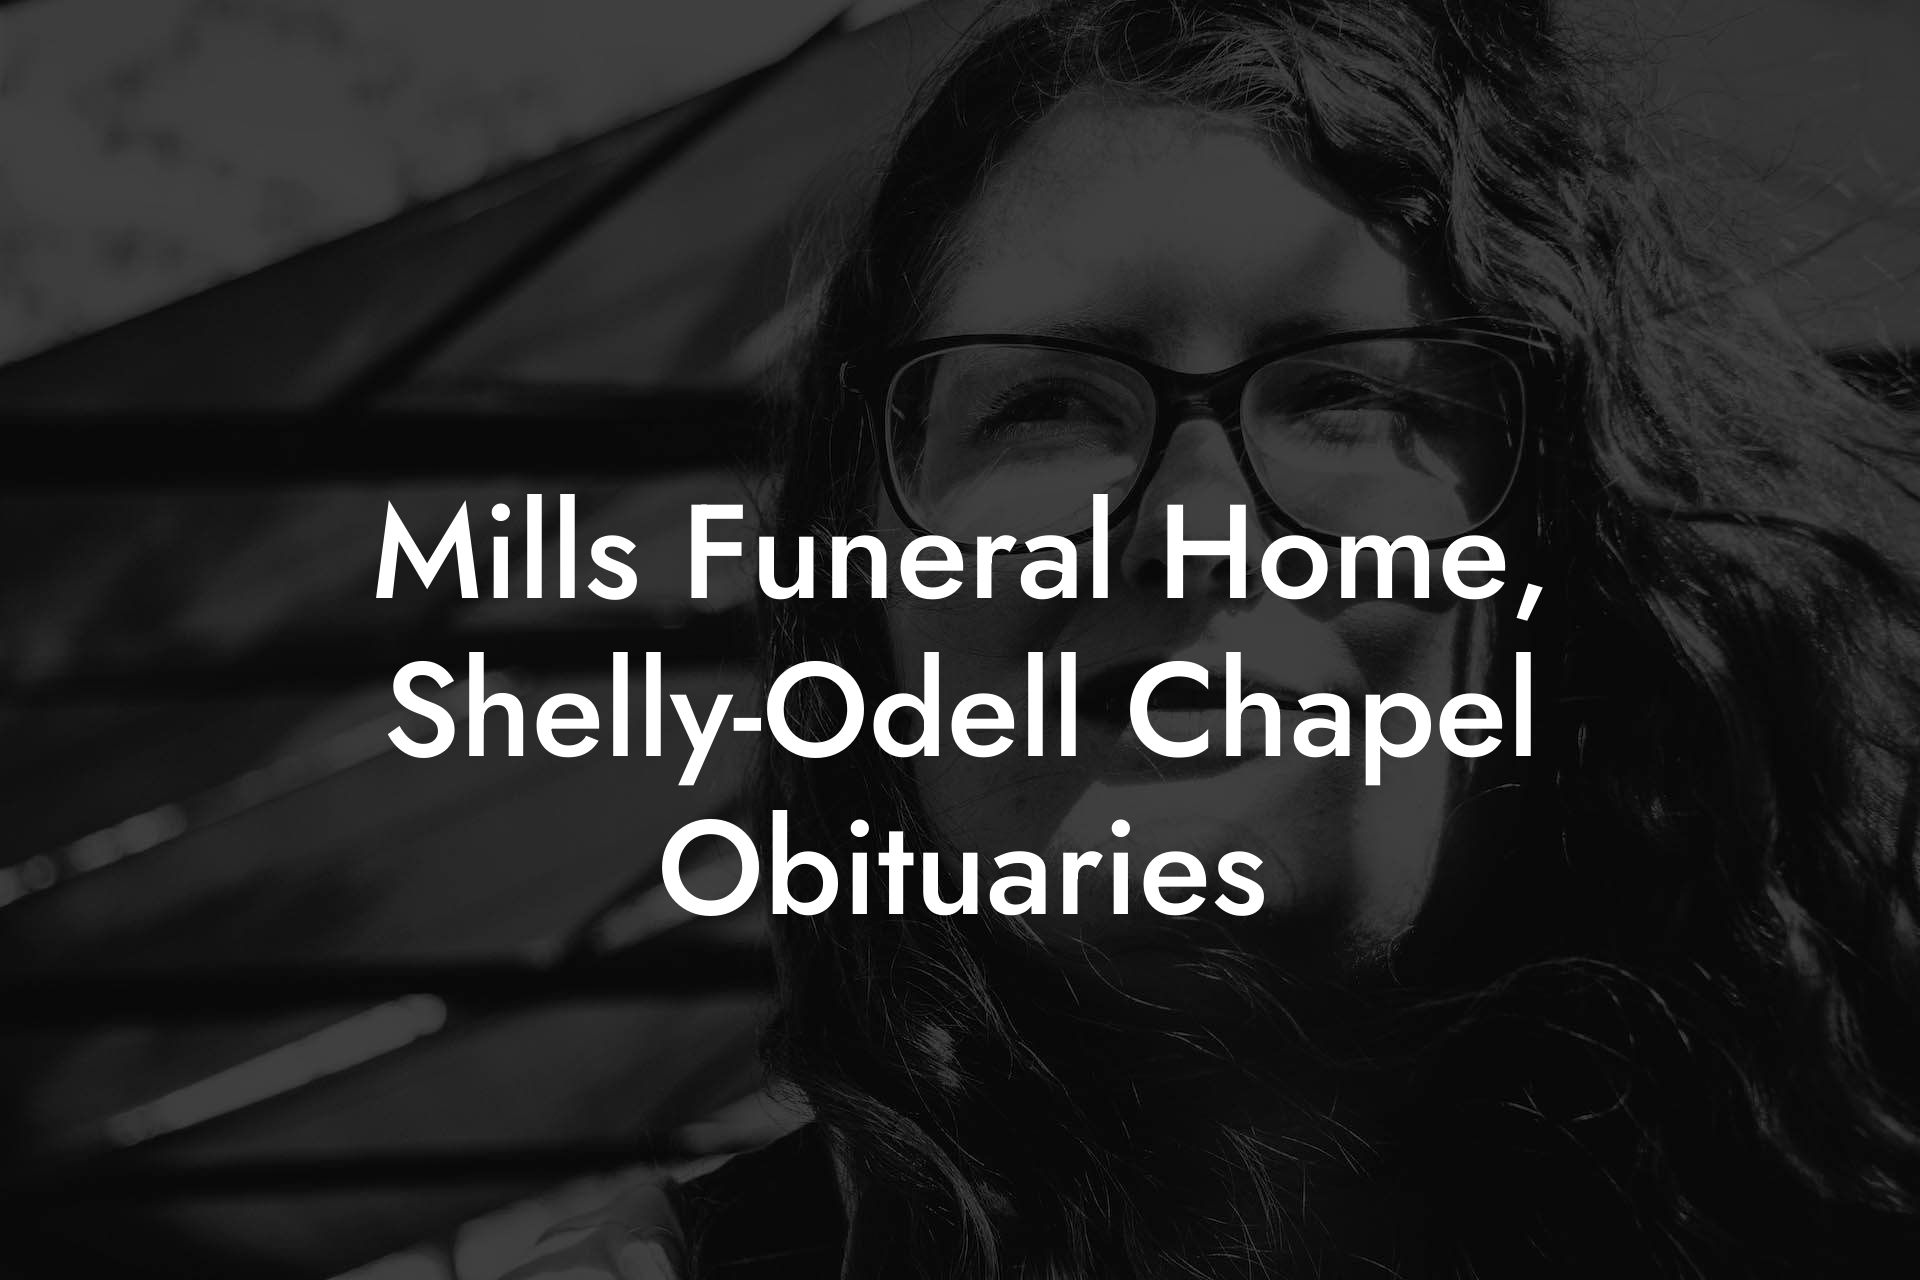 Mills Funeral Home - Shelly-Odell Chapel Obituaries